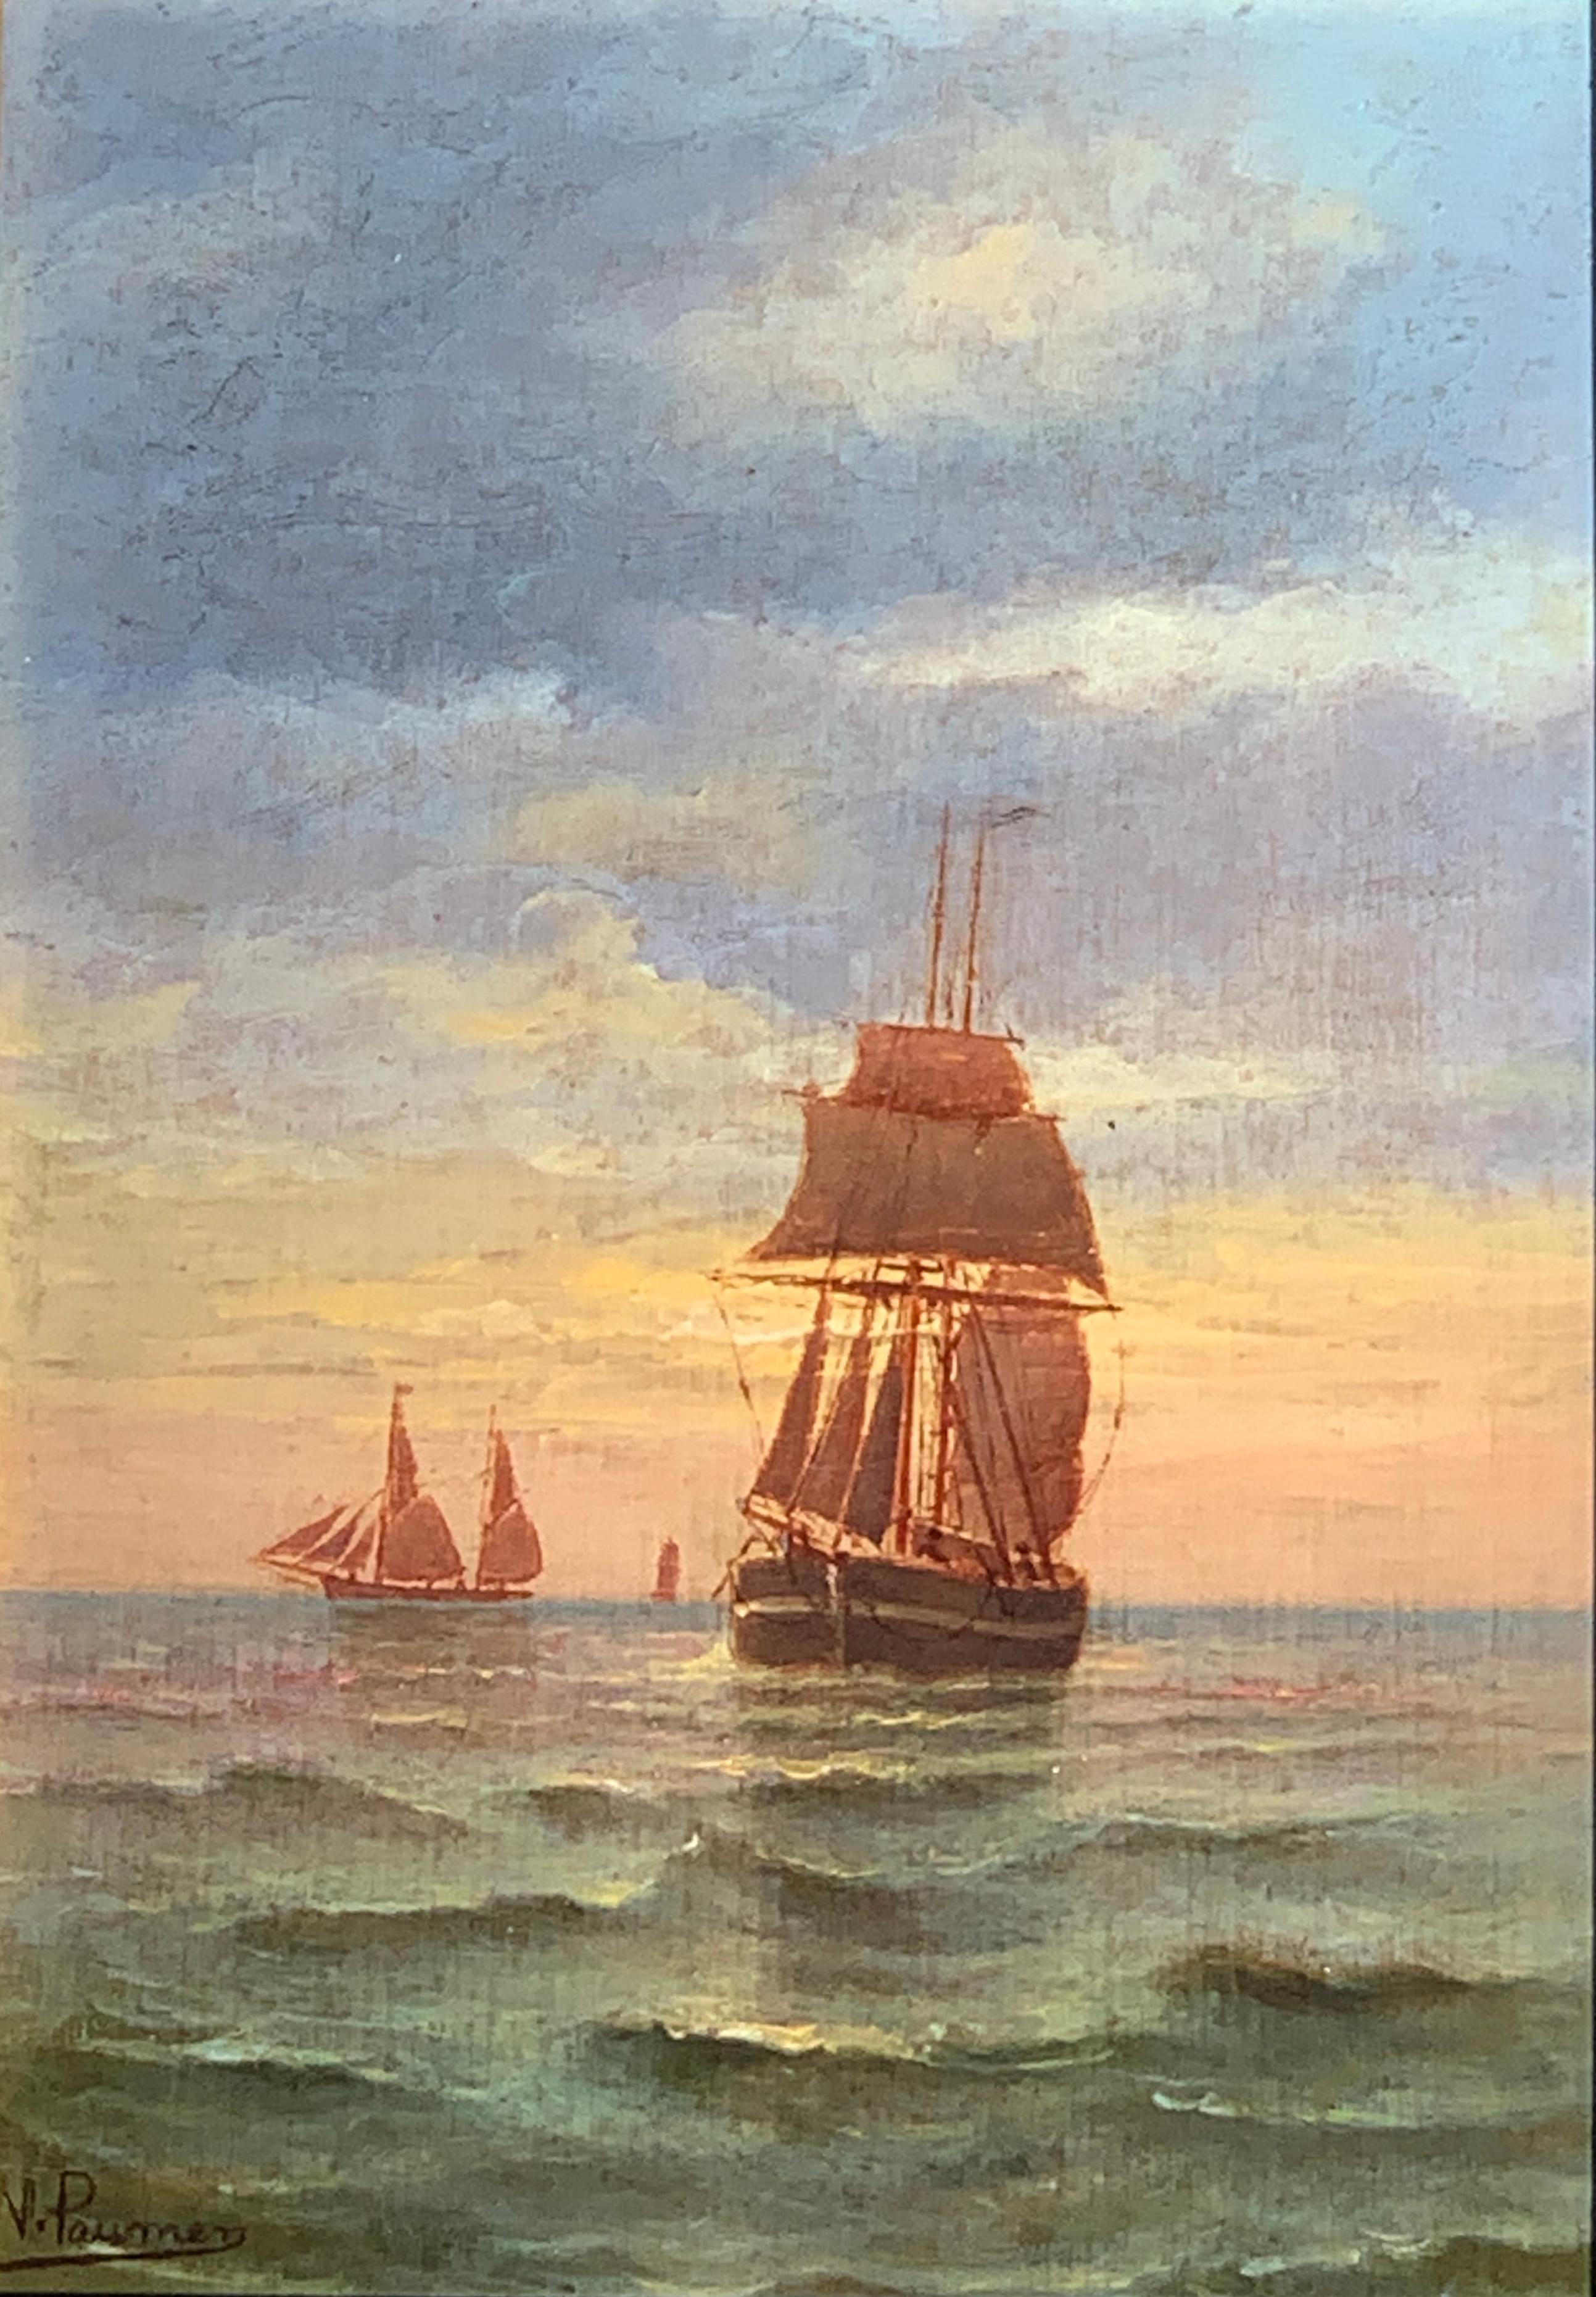 French 19th century Victorian Shipping scene at Sunset - Painting by N. Pauman